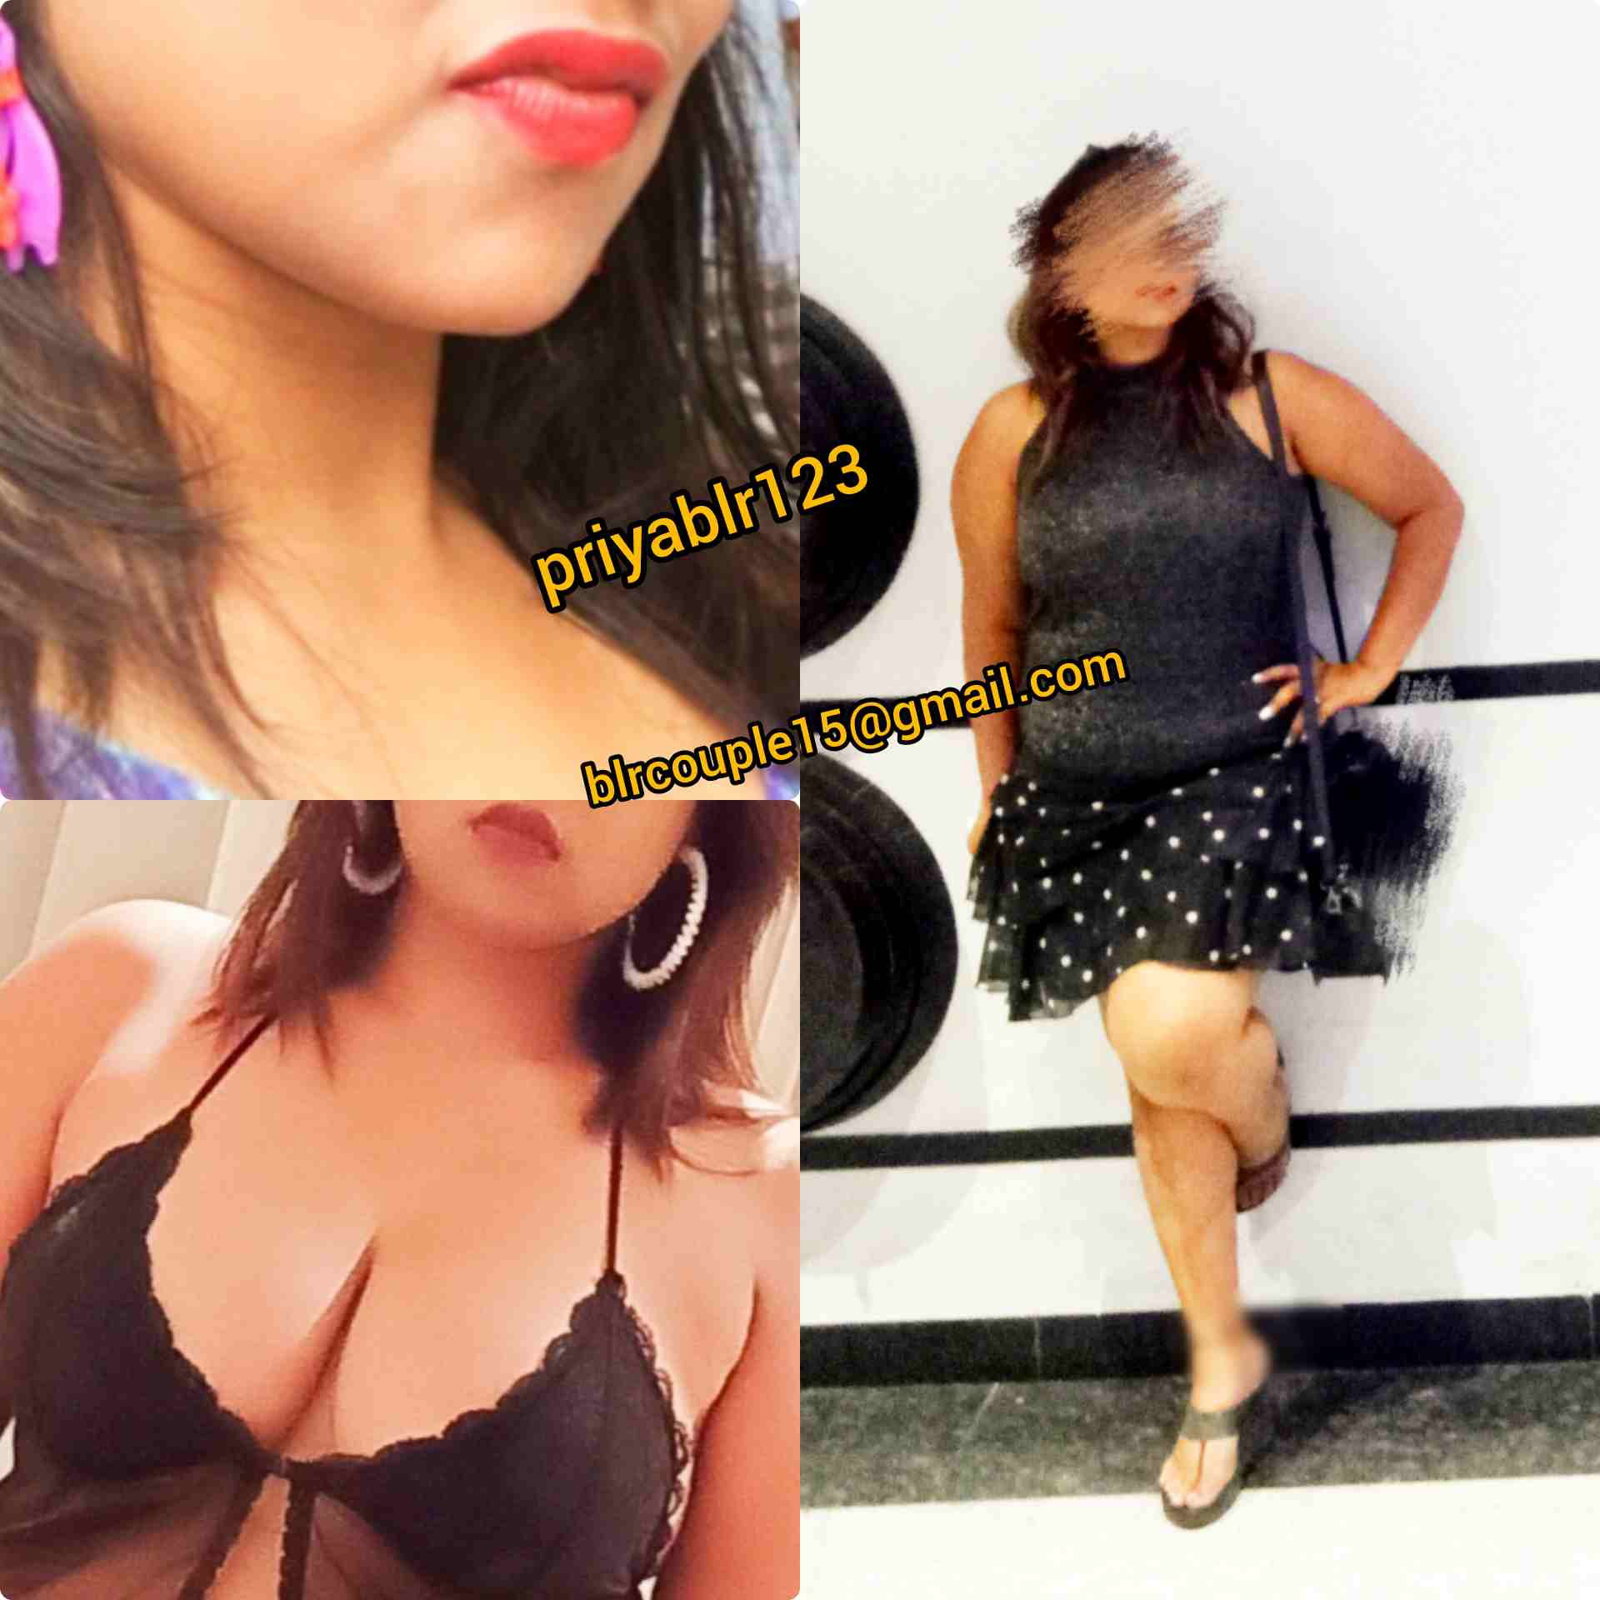 Shared Photo by priyablr123 with the username @priyablr123, who is a star user,  April 18, 2020 at 9:46 AM. The post is about the topic Desi Girls and the text says 'Dirty comments required.
Priya slutty cleavage, smoochable lips and sexy figure below for cumming!
Guys we r married Cpl from Bangalore India. She is an Elite Companion for alone meetings as well. Looking for decent males for fwb fun only.
Keep sharing..'